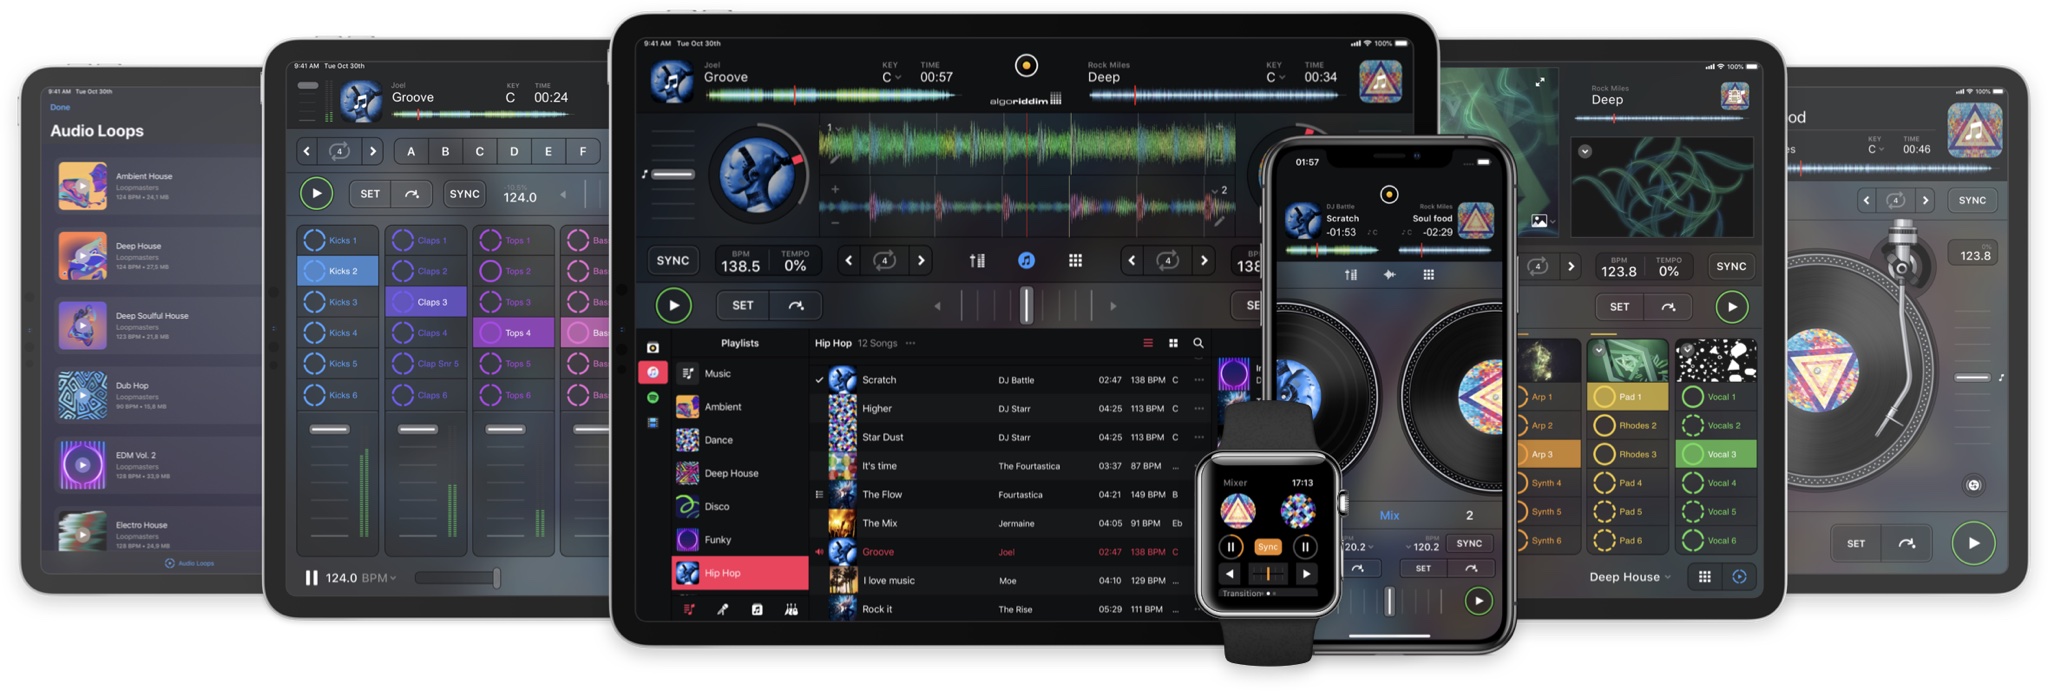 for apple download djay Pro AI